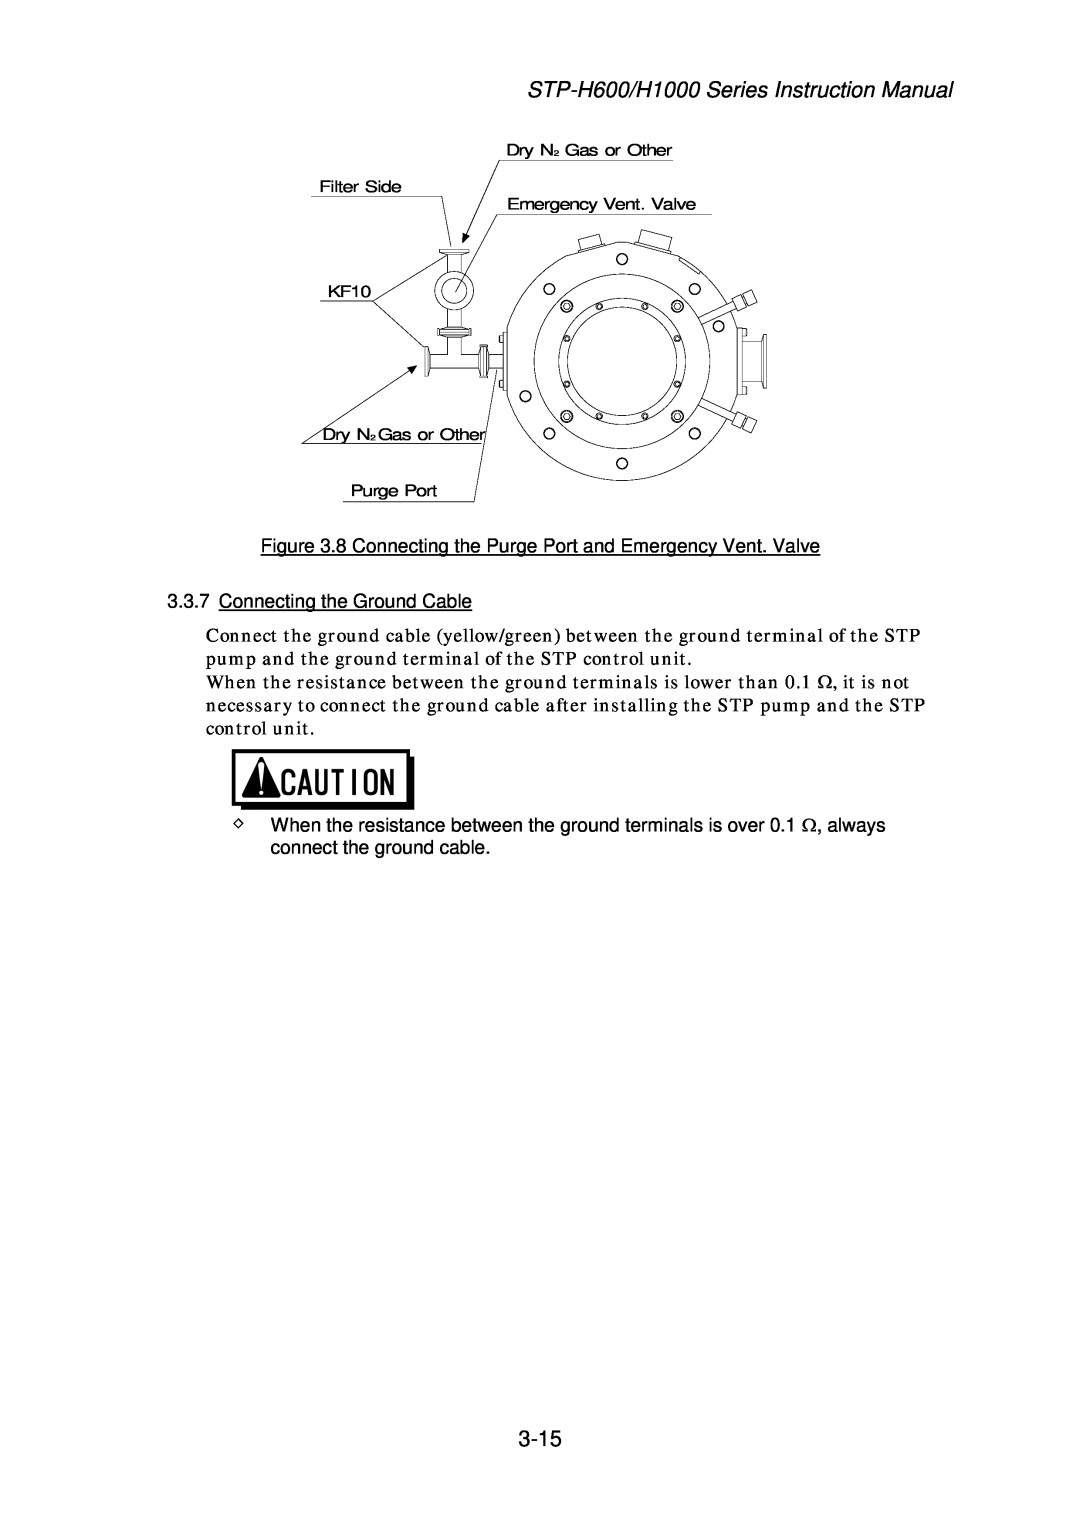 Seiko Instruments MT-17E-003-D instruction manual 3.3.7Connecting the Ground Cable 